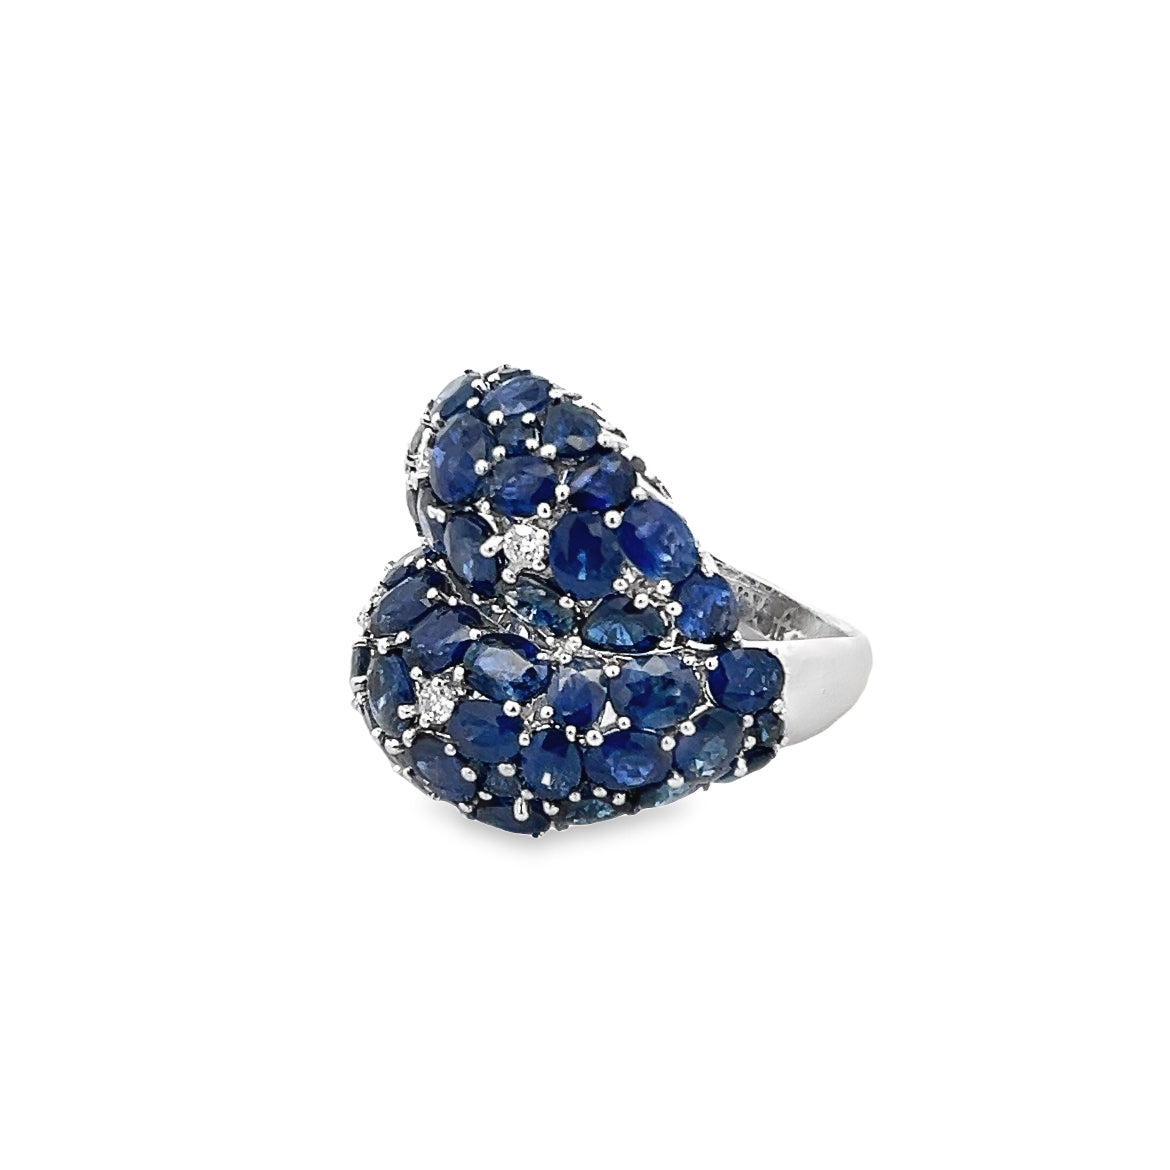 18K WHITE GOLD BOMBE RING WITH BLUE SAPPHIRE 15.28CT